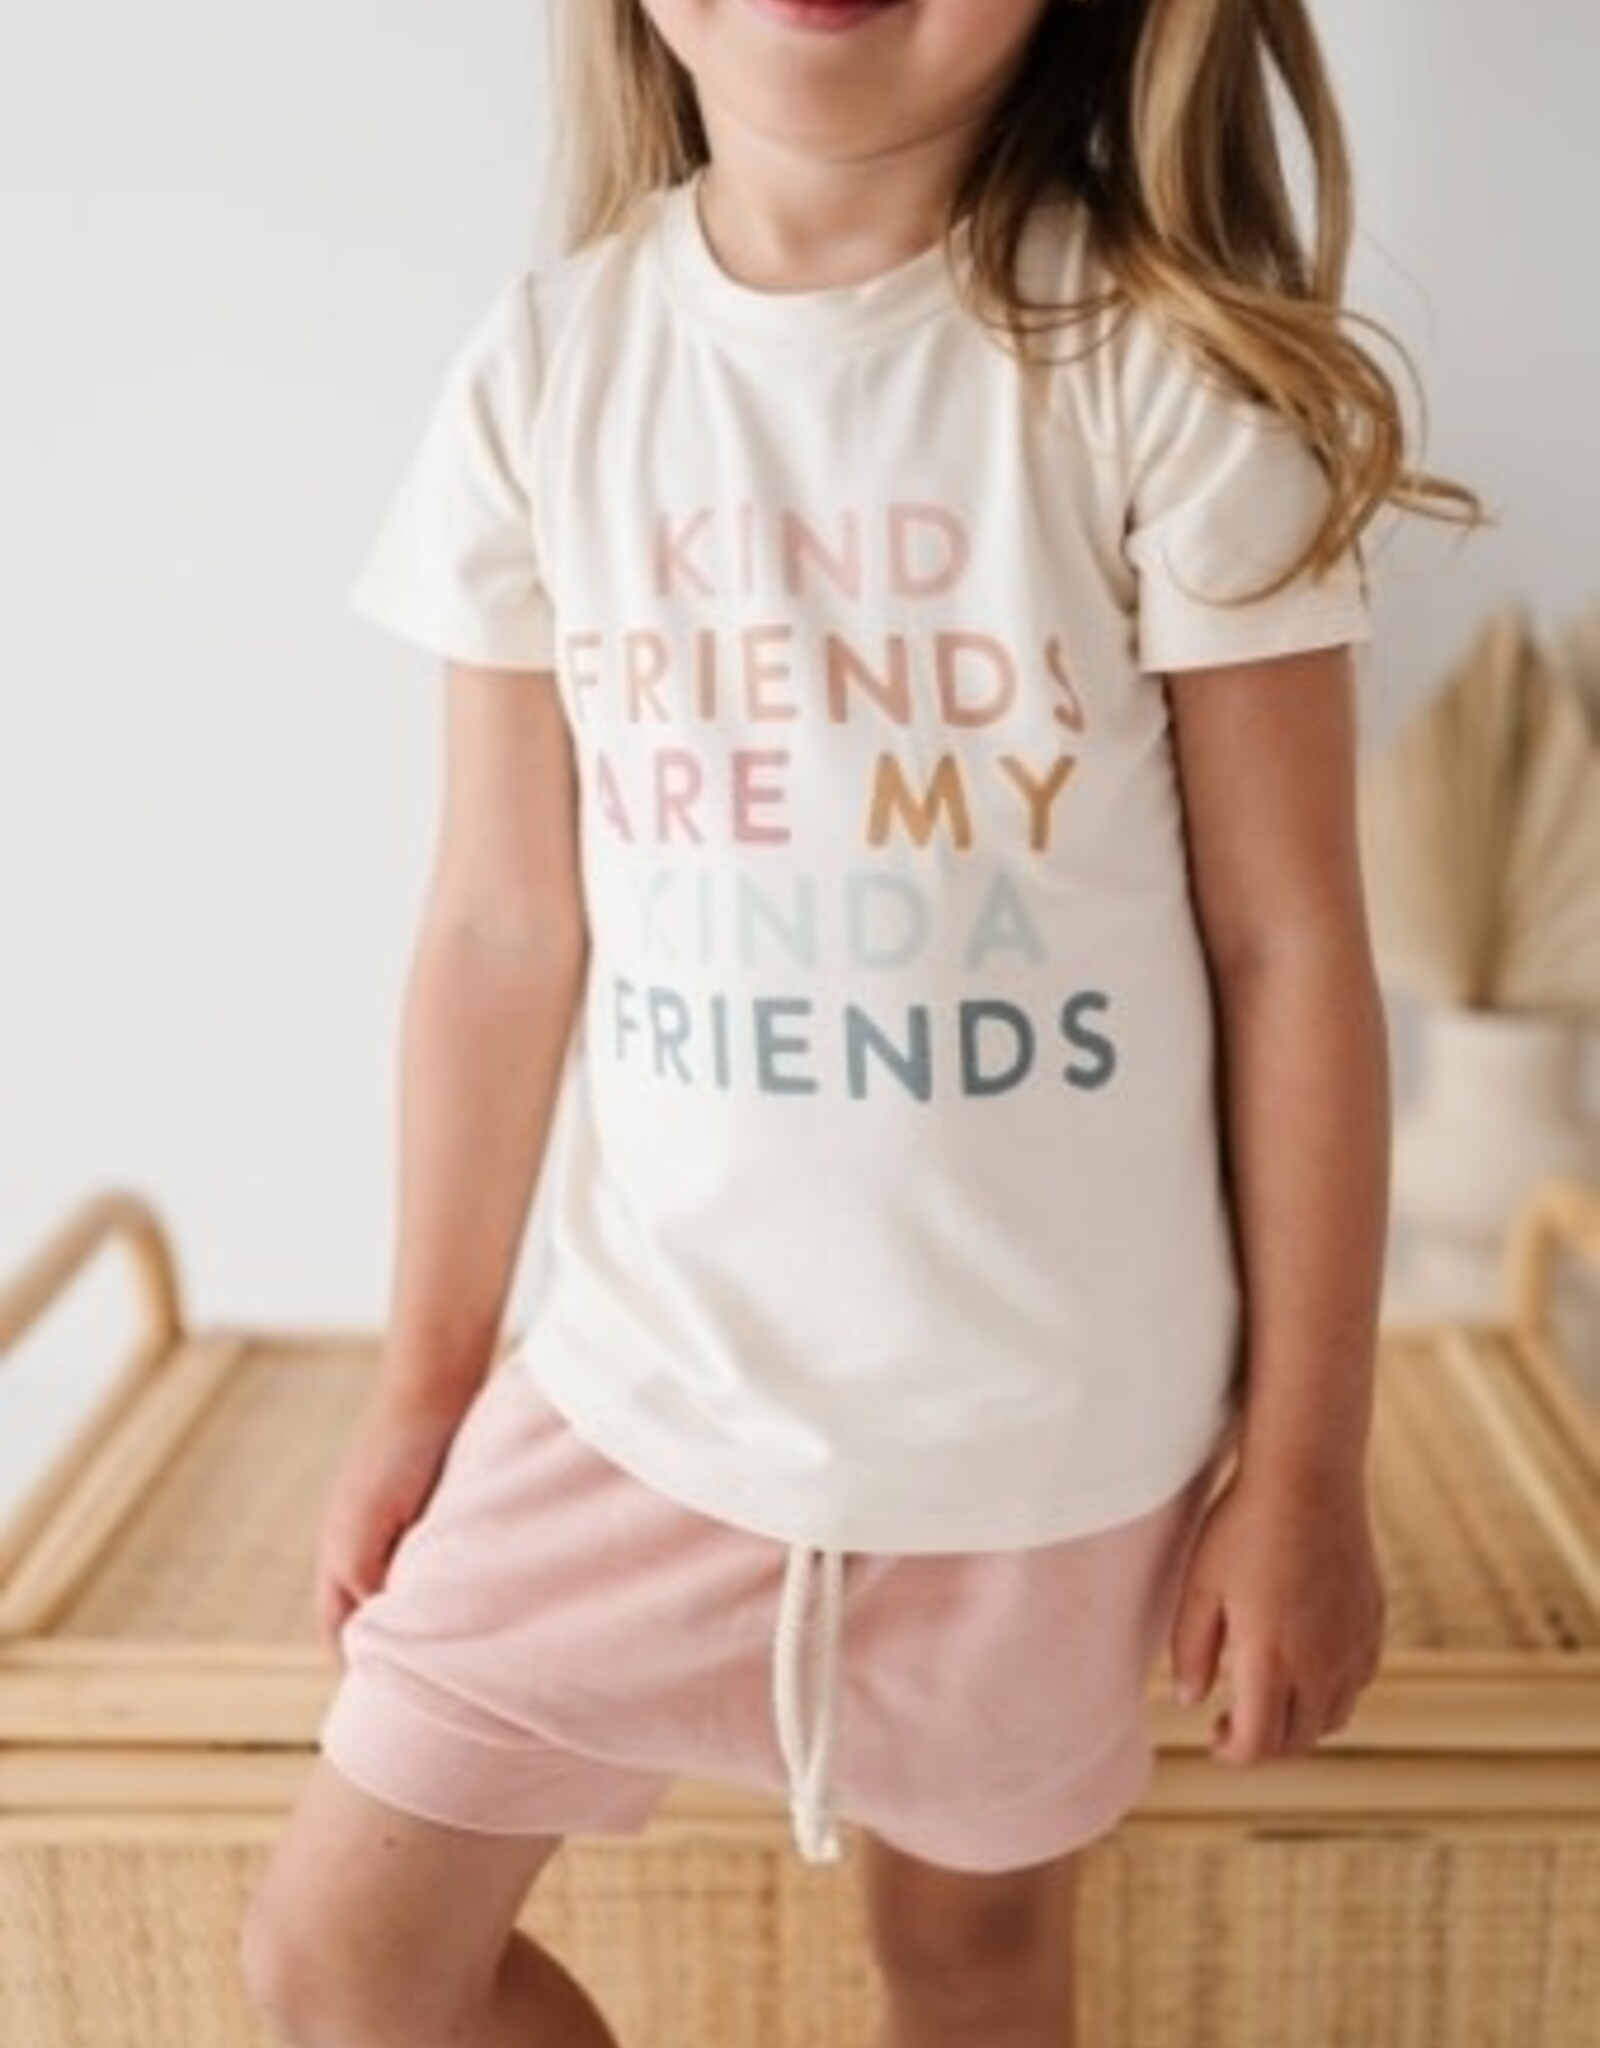 Babysprouts GIRL'S TEE